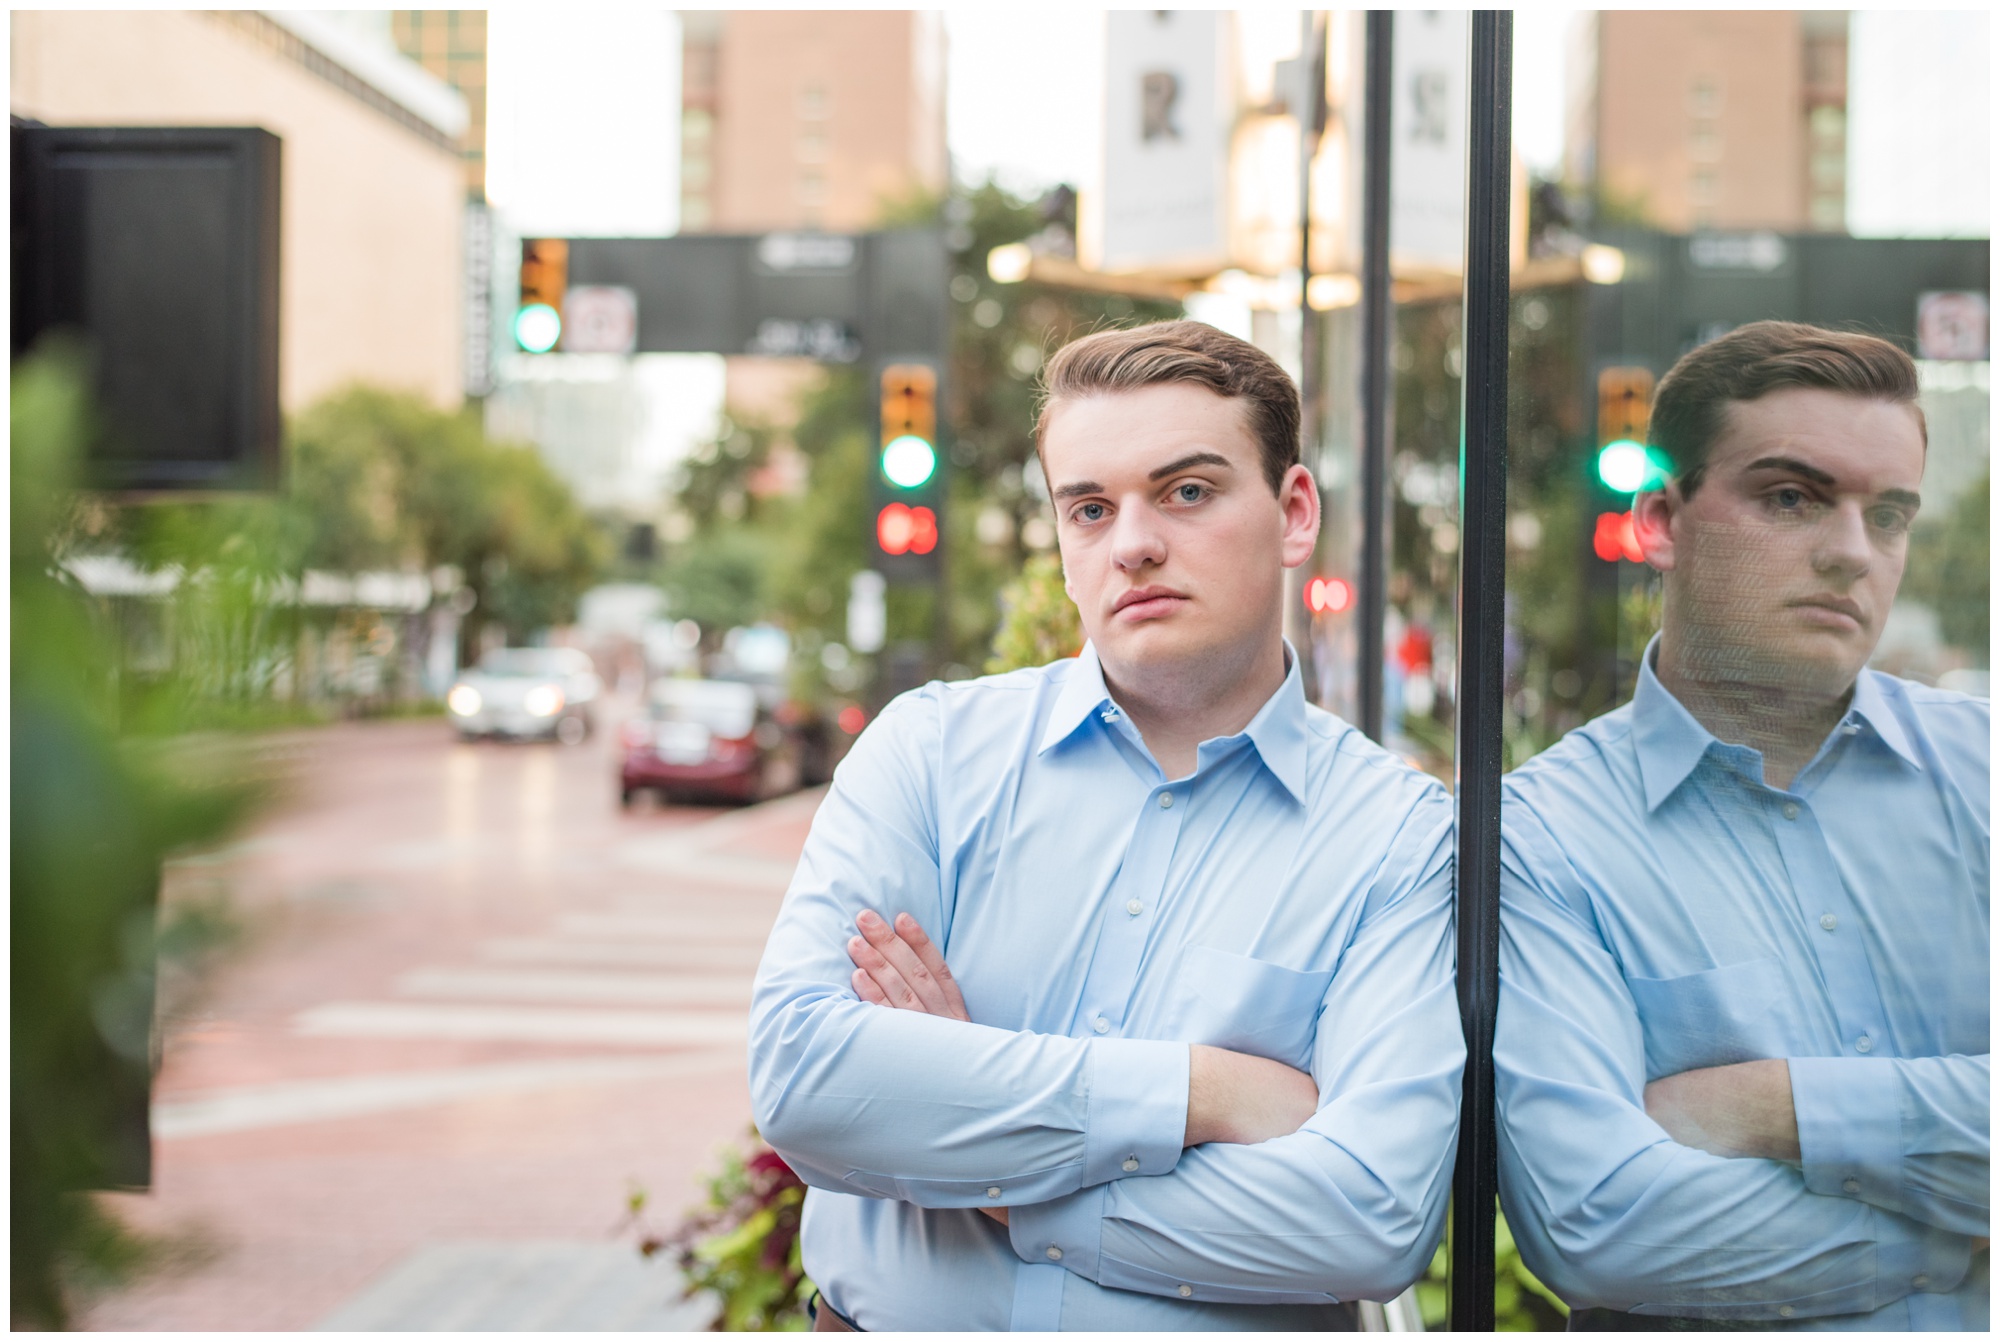 Downtown Fort Worth | Downtown Fort Worth Senior Session | Fort Worth Senior Photographer | Lauren Grimes Photography